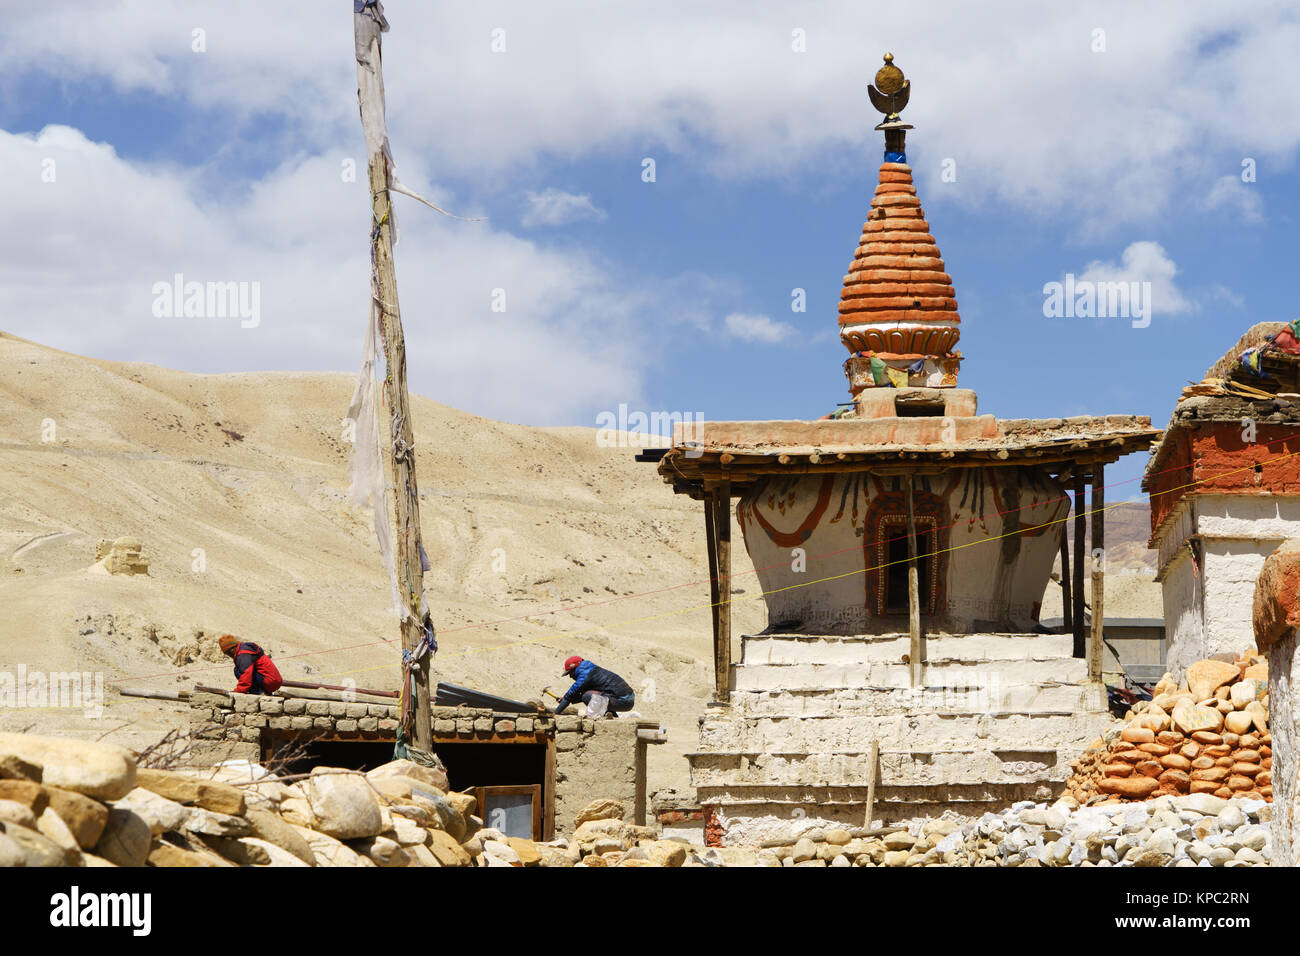 Two Tibetan men are repairing a shed adjacent to a Buddhist stupa in Lo Manthang, Upper Mustang region, Nepal. Stock Photo